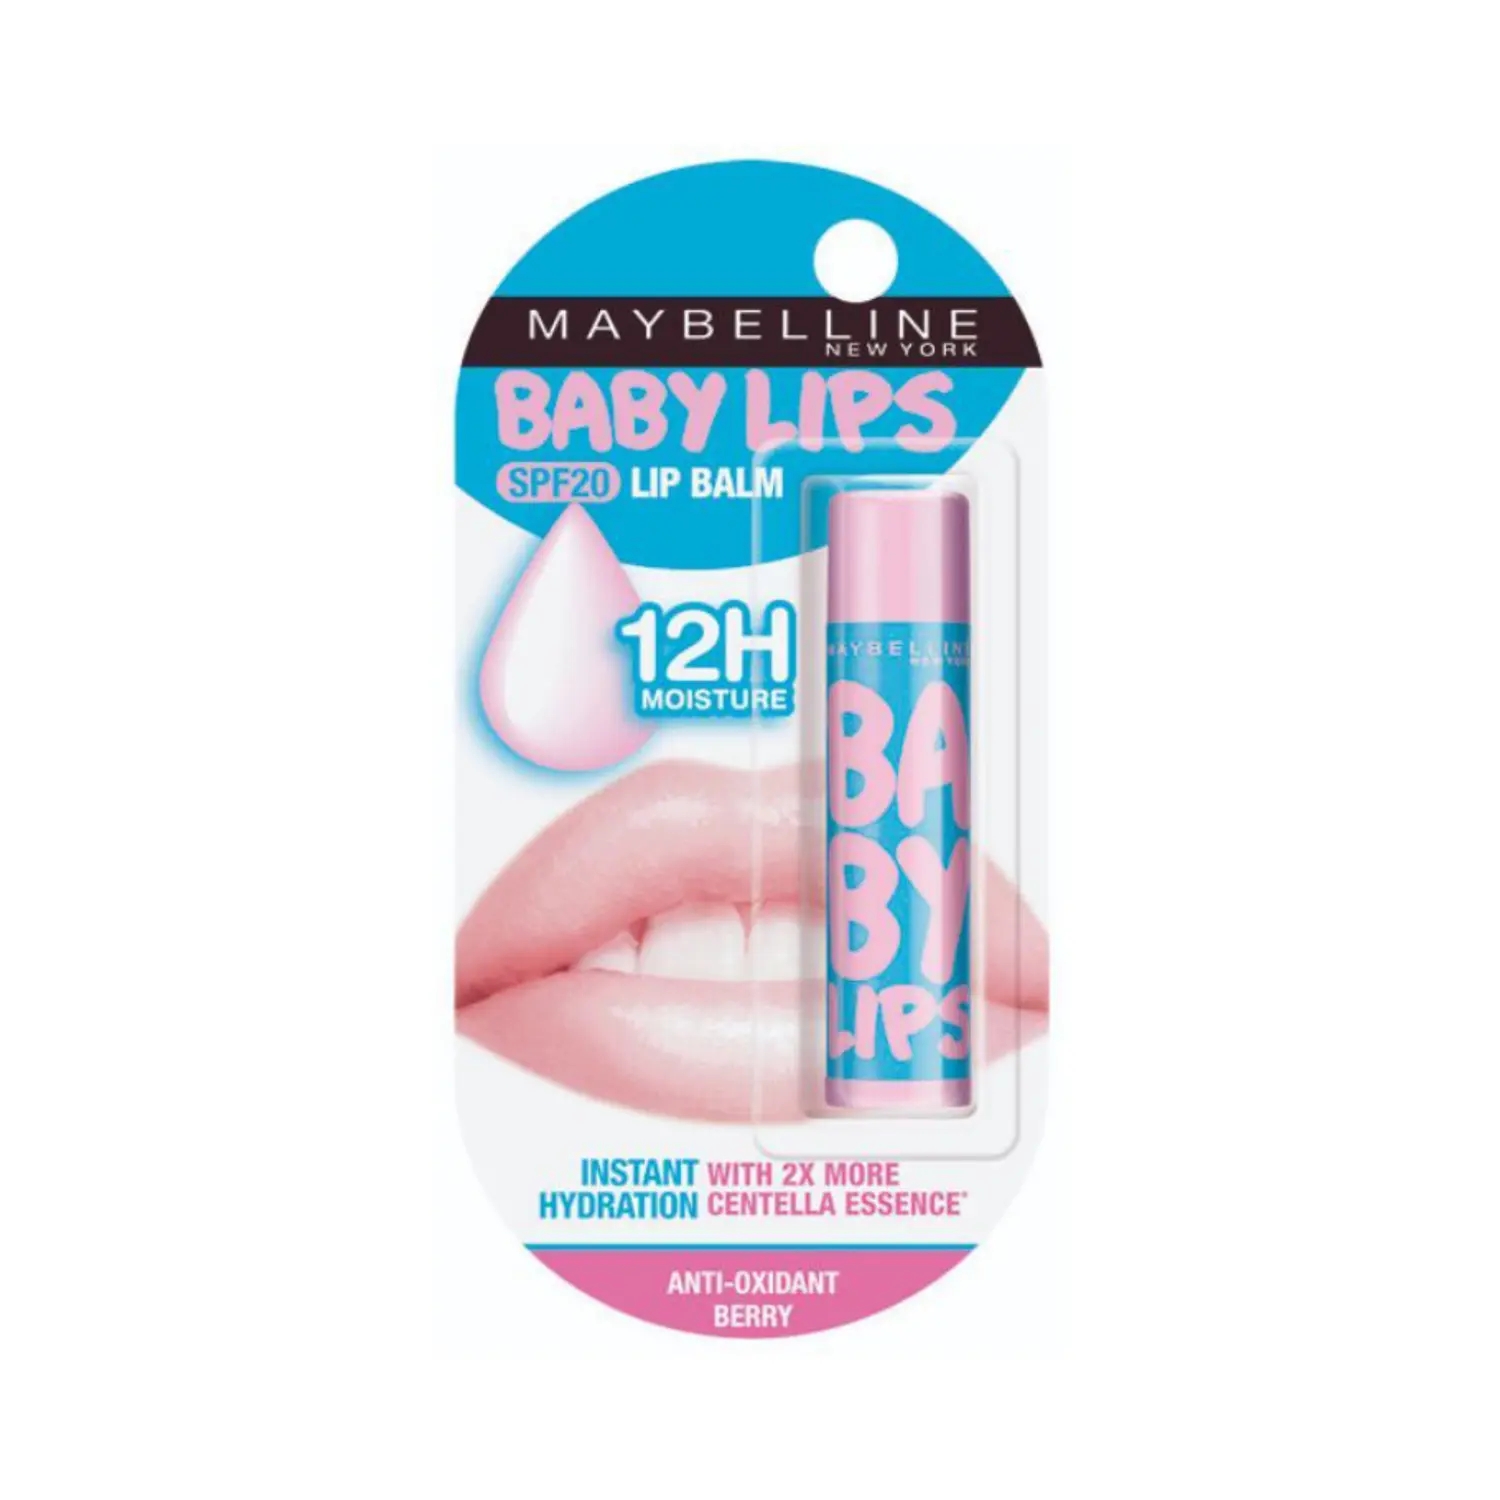 Maybelline New York | Maybelline New York Baby Lips Color Lip Balm SPF 11 - Anti Oxidant Berry (4g)